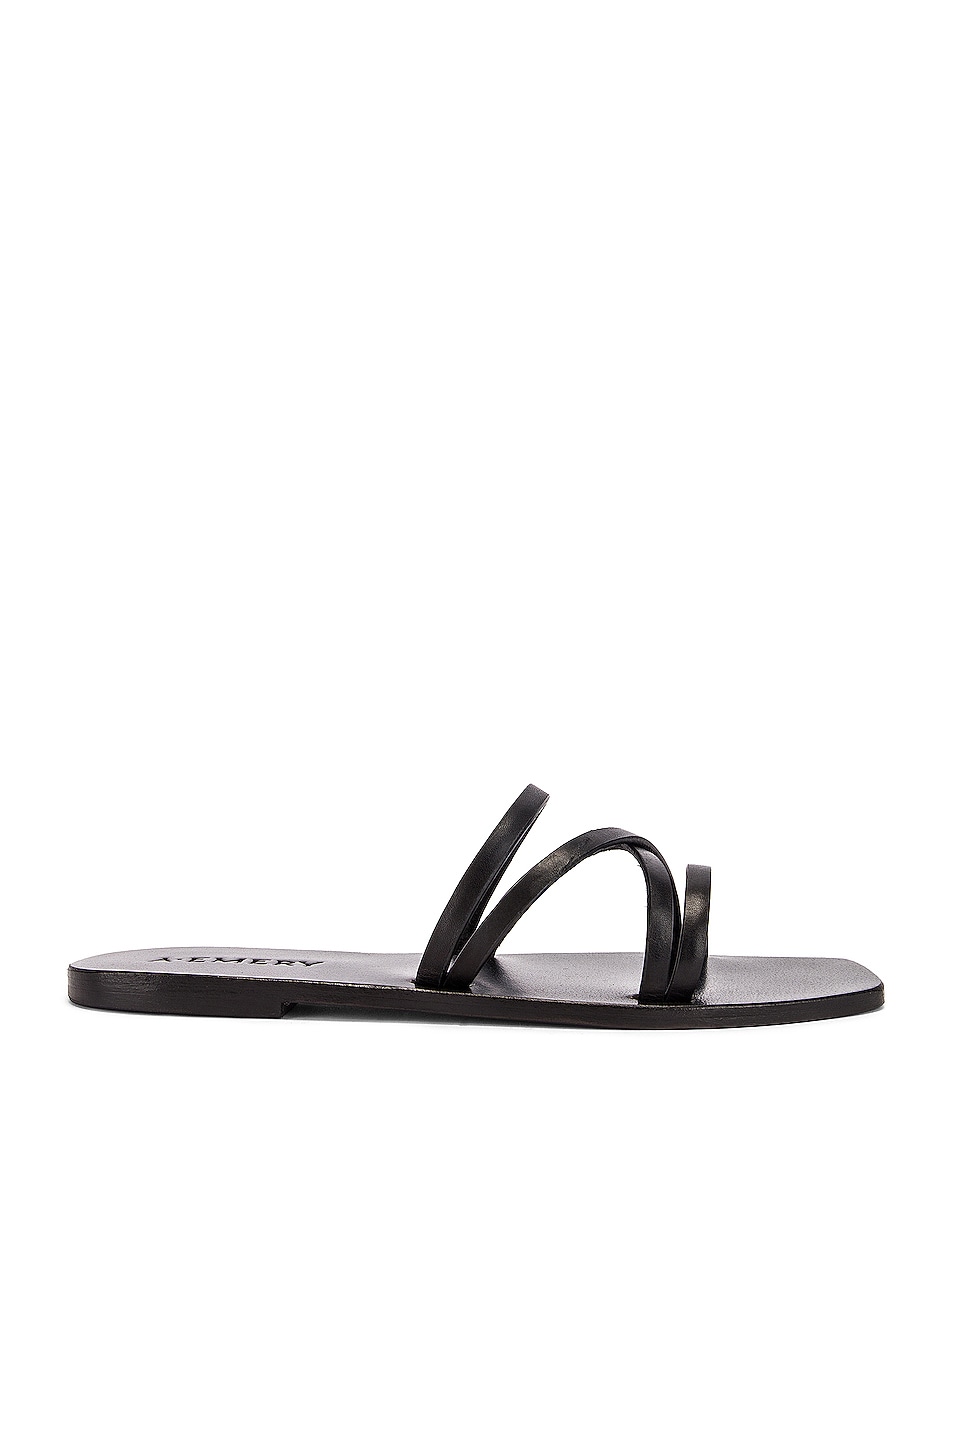 Image 1 of A.EMERY Riley Sandal in Black